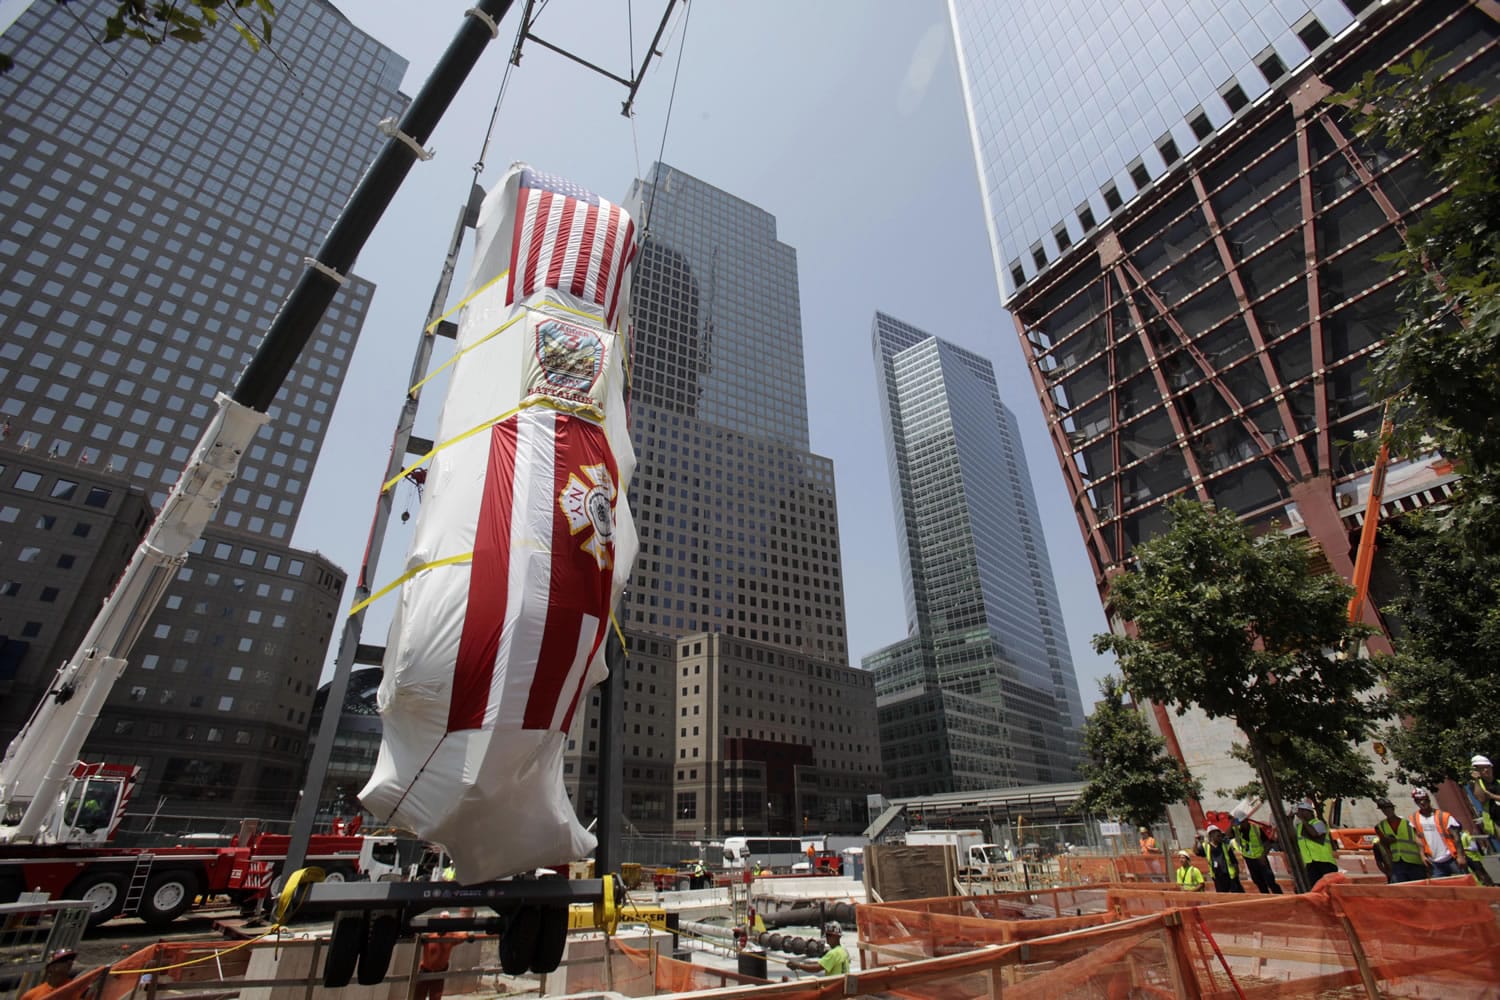 The Fire Department of New York's Ladder Company 3 fire truck is lowered by crane into the National September 11 Memorial Museum in New York on July 20. The fire truck was used to evacuate people from the World Trade Center towers during the terror attacks on Sept.